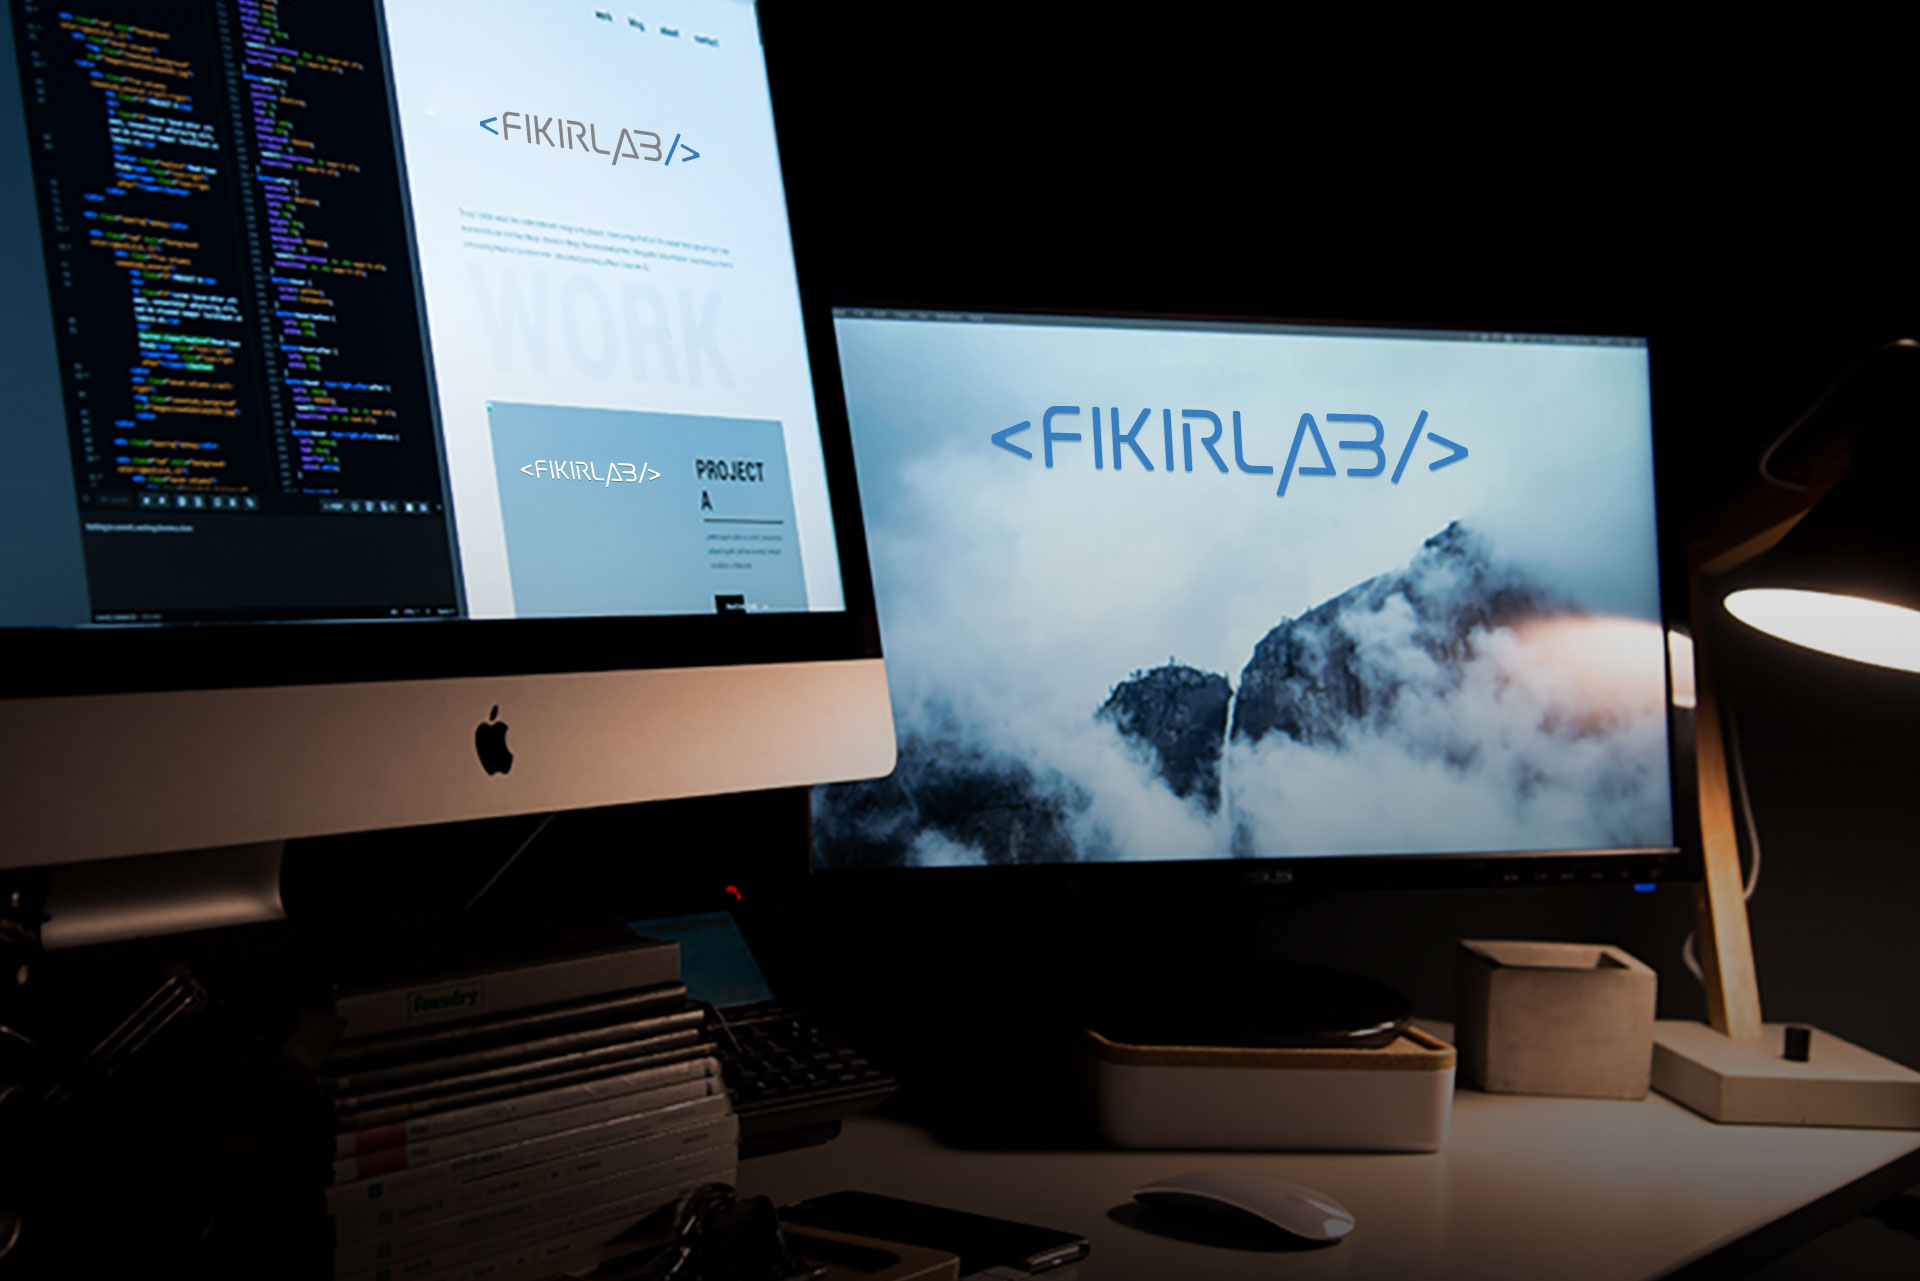 Blue & white Theme| Fikirlab| Simple & Professional| Website design mockup| Macpro| Affordable solutions| UAE| Get Solutions